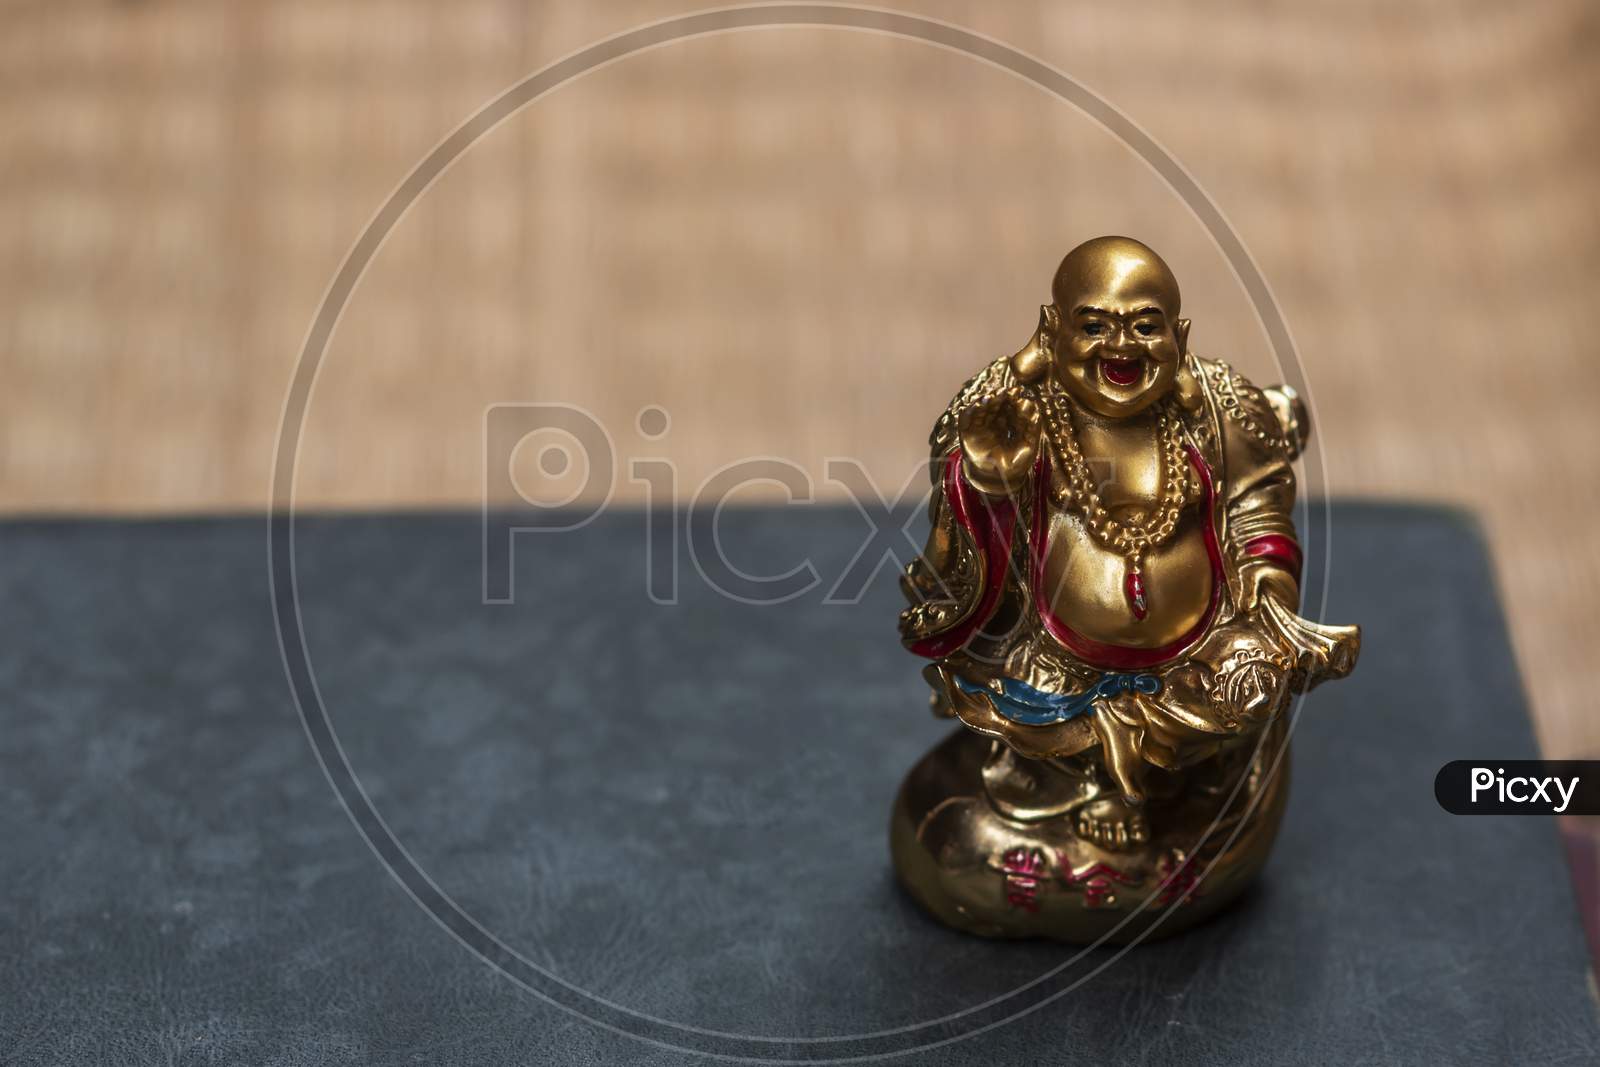 A laughing Buddha kept in a book with jute texture in the background